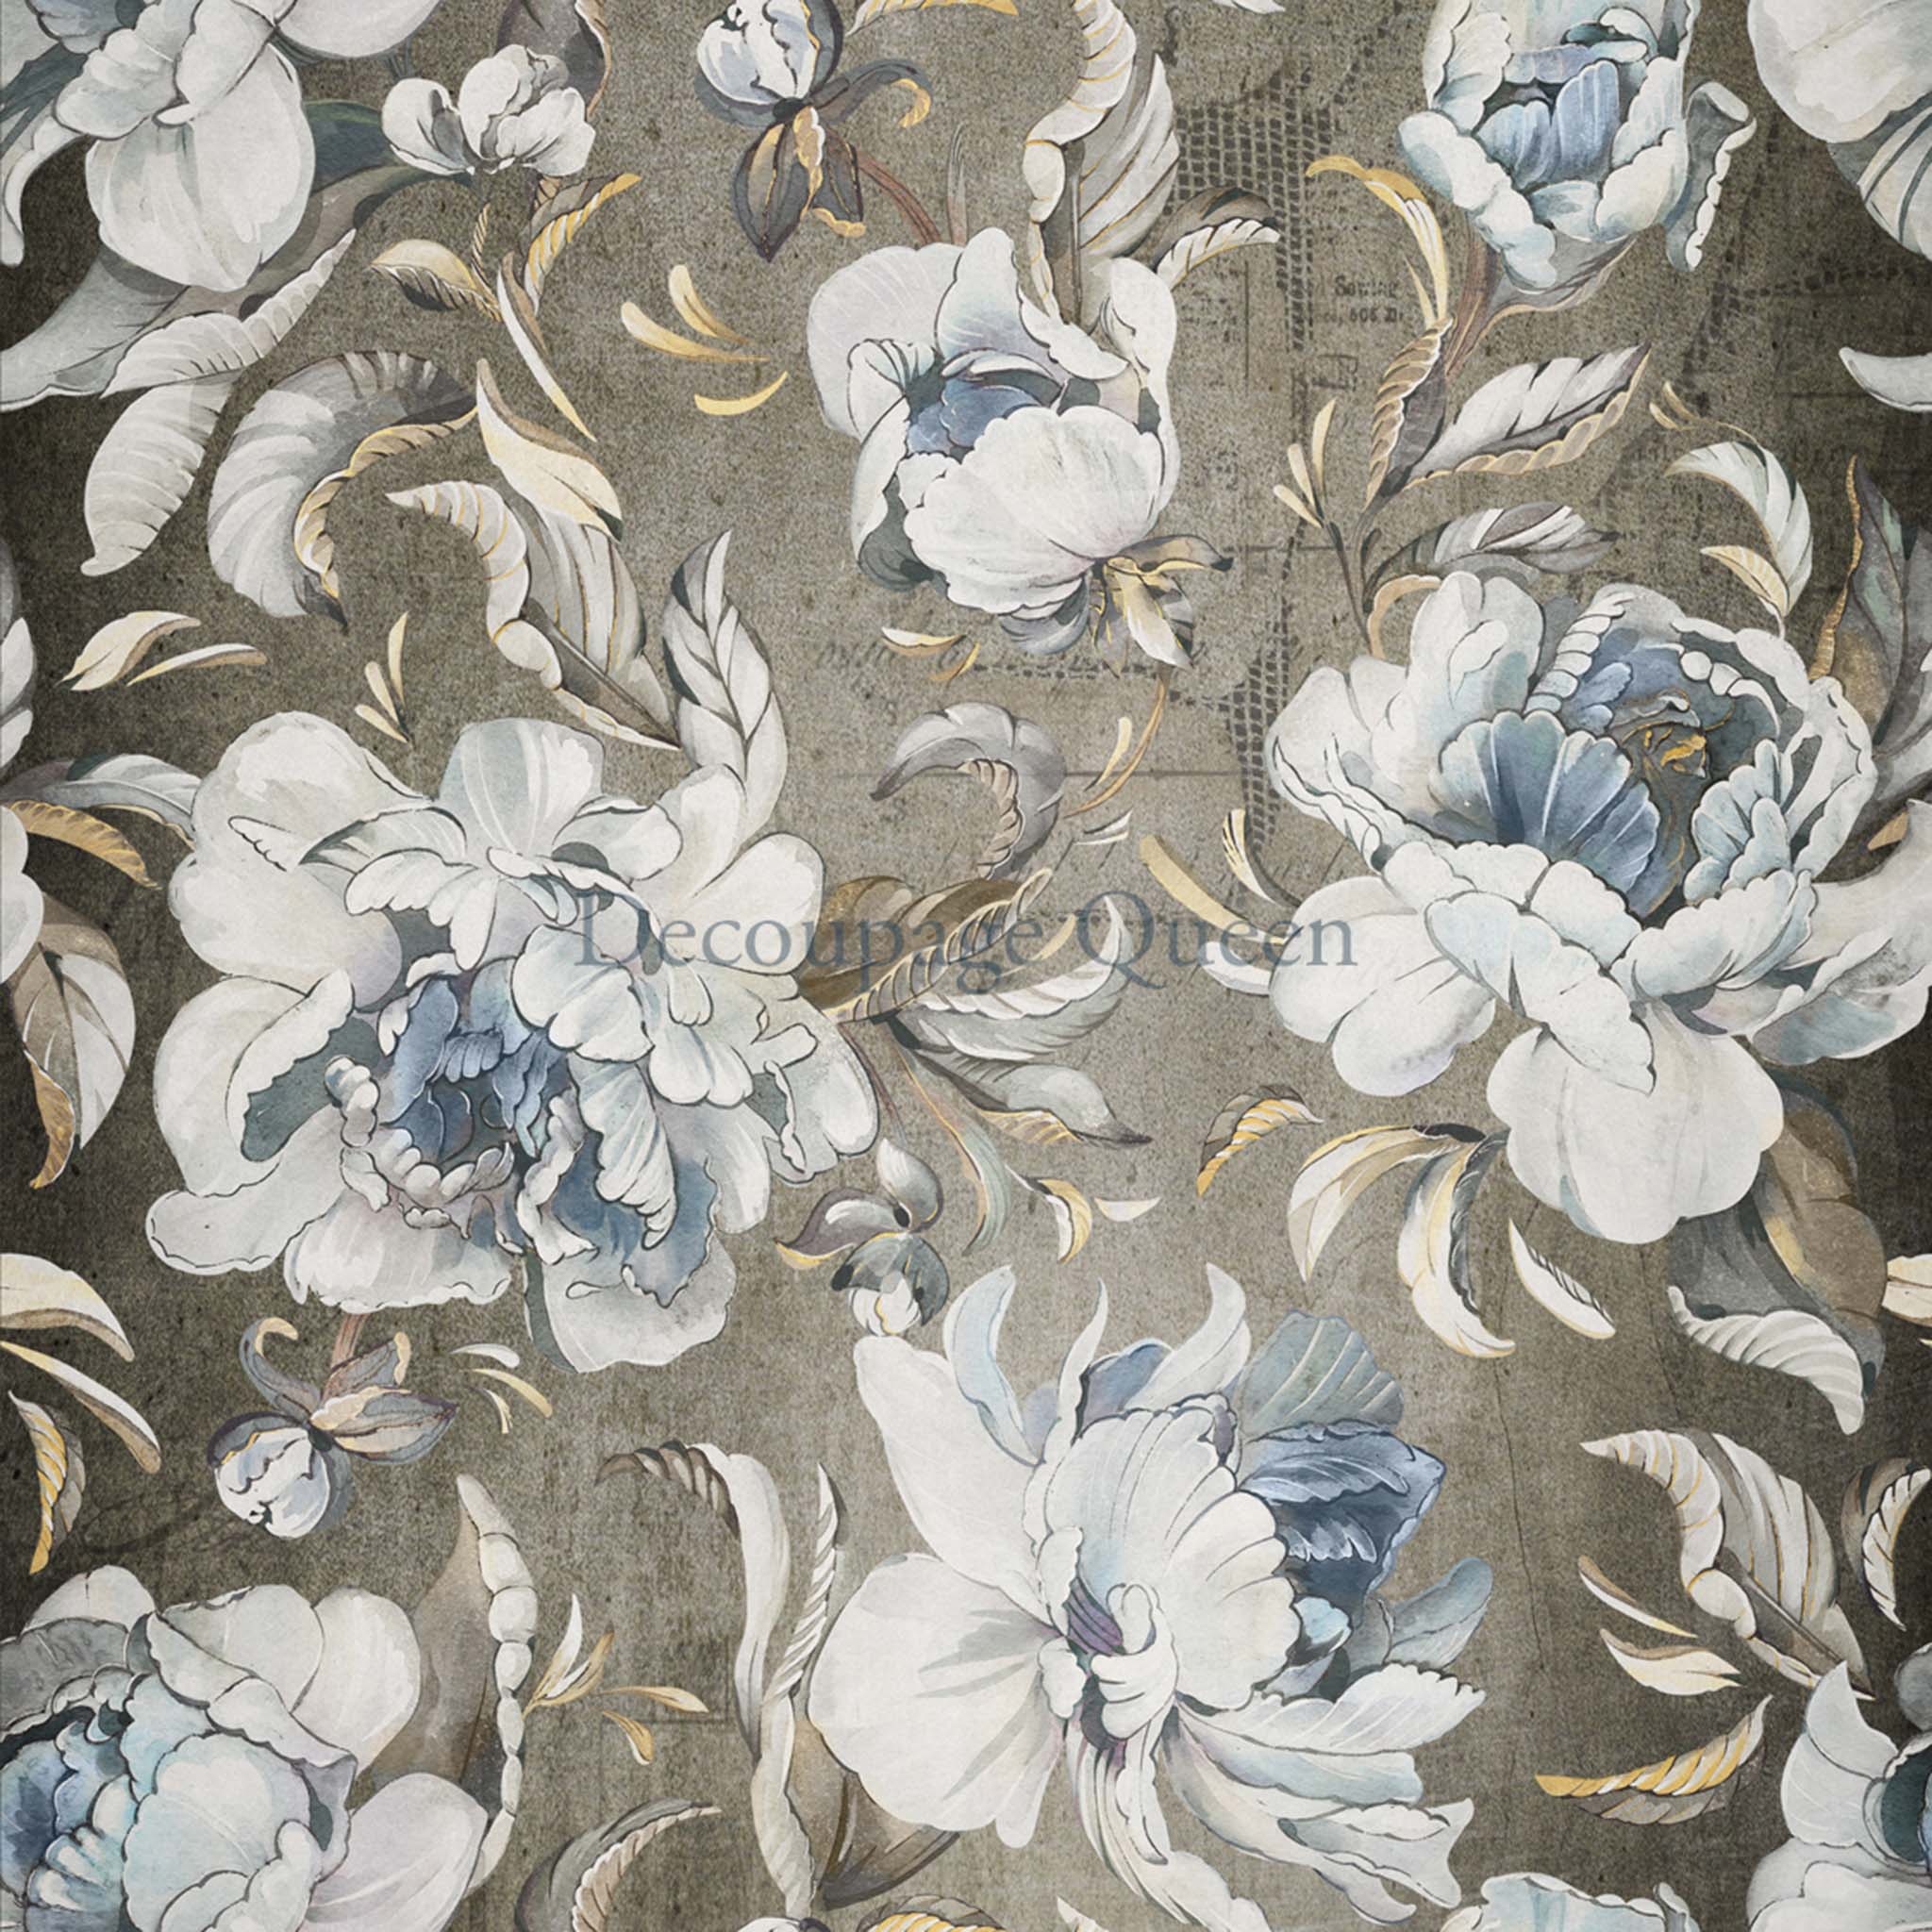 Close-up of an A1 rice paper that features a soft gray background, adorned with delicate white and blue flower designs.